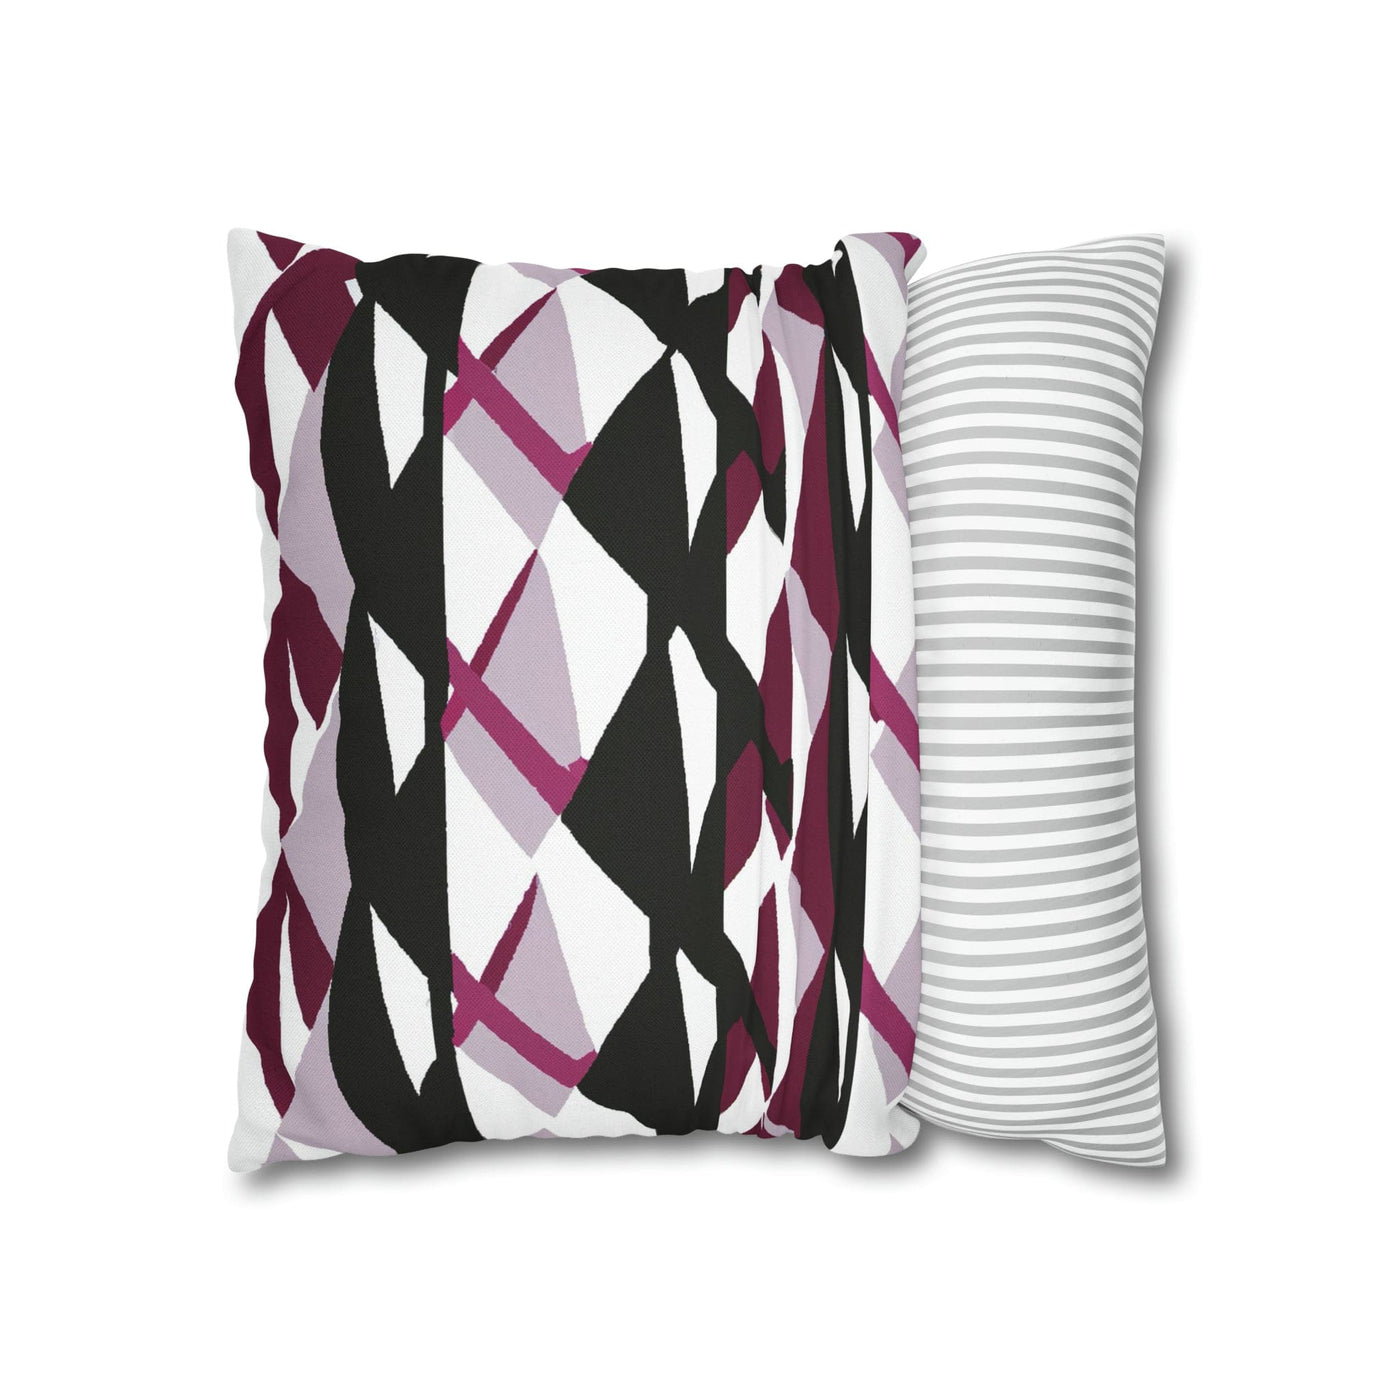 Decorative Throw Pillow Covers With Zipper - Set Of 2 Mauve Pink And Black